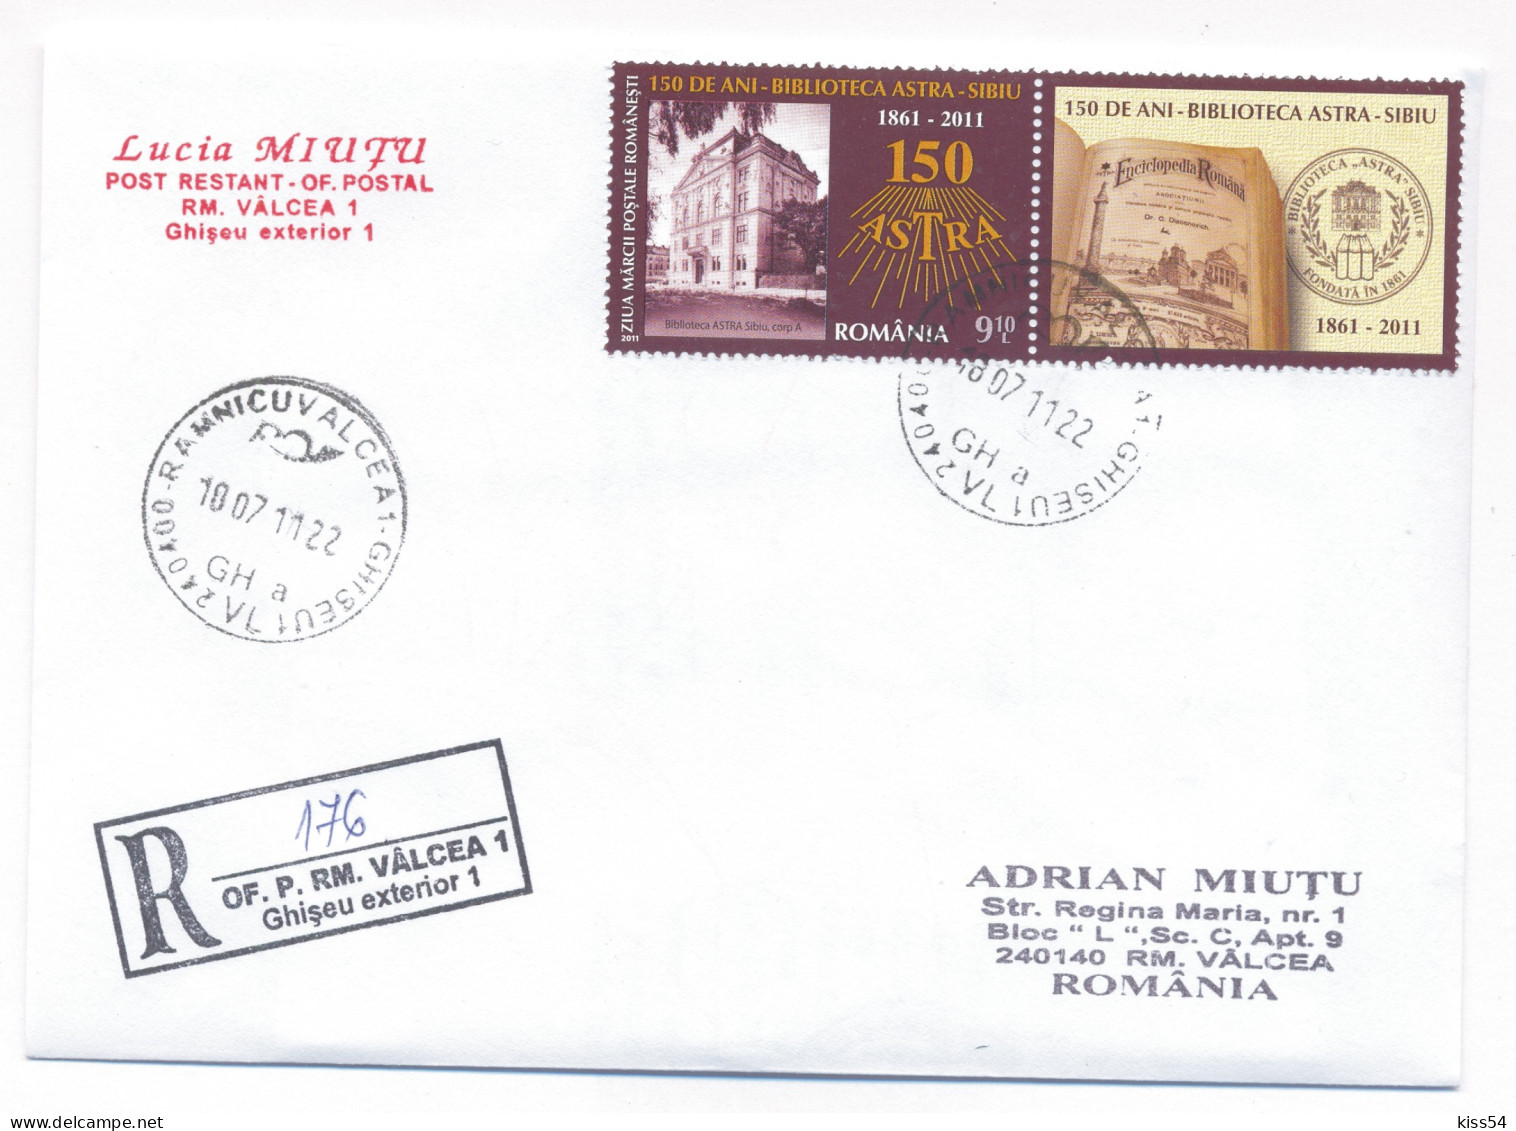 CP 16 - 176-a ASTRA LIBRARY, Sibiu, Romania, 150 Years - Registered, Stamp With Vignette - 2011 - Briefe U. Dokumente